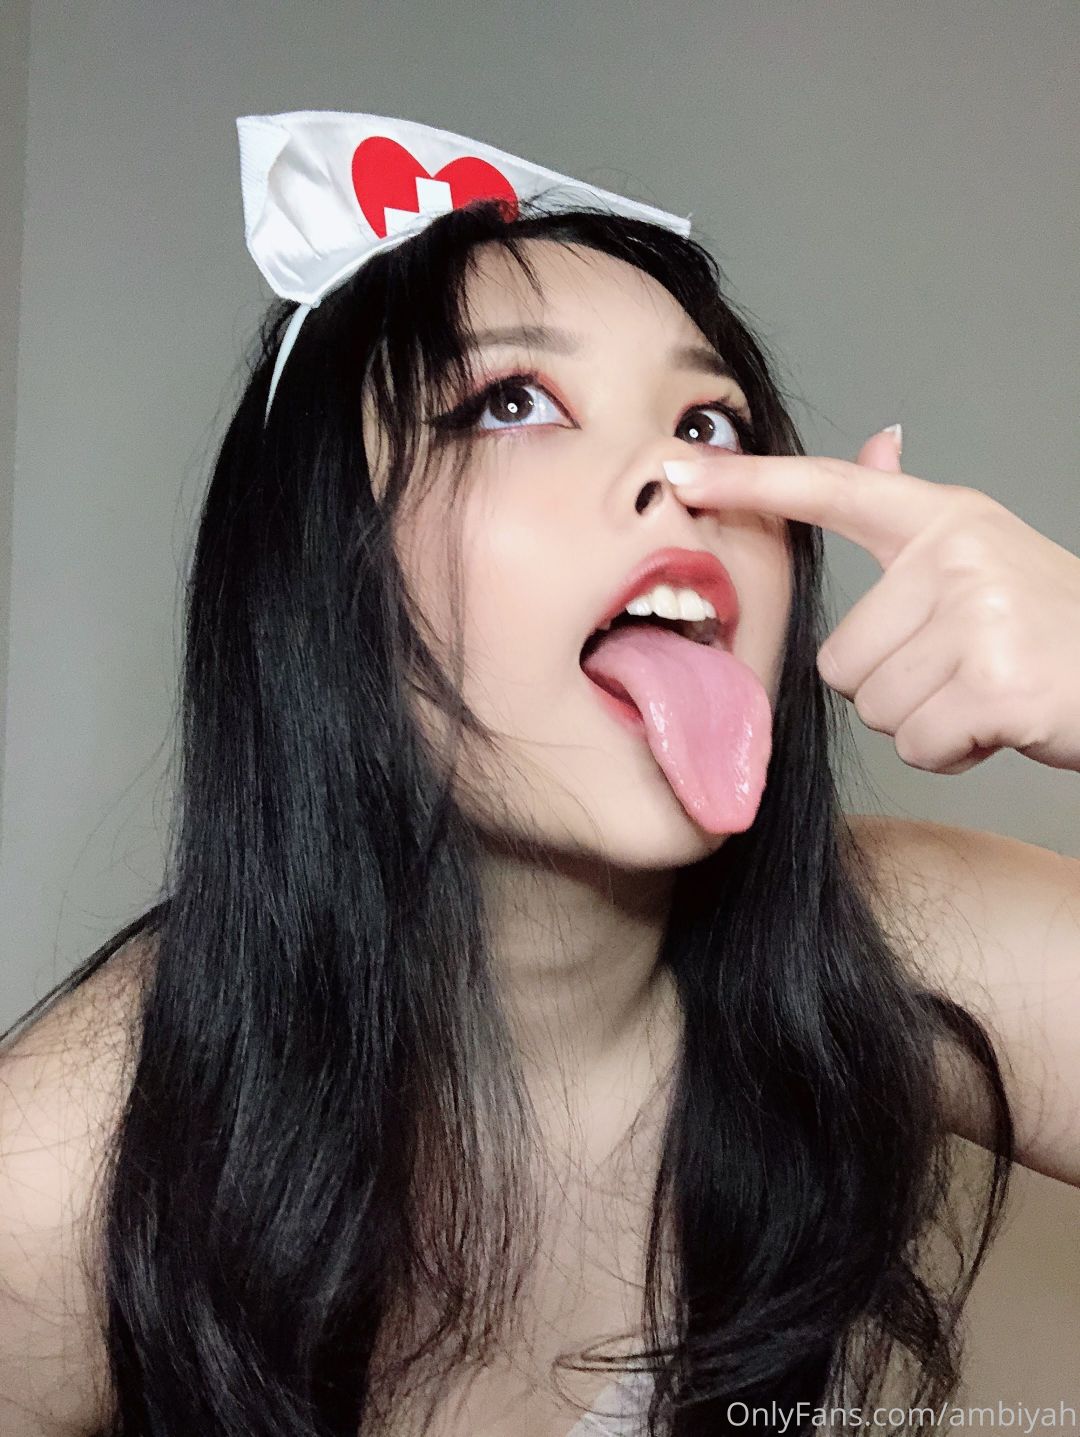 AsianOnlyfans 72 015 1013 20220225